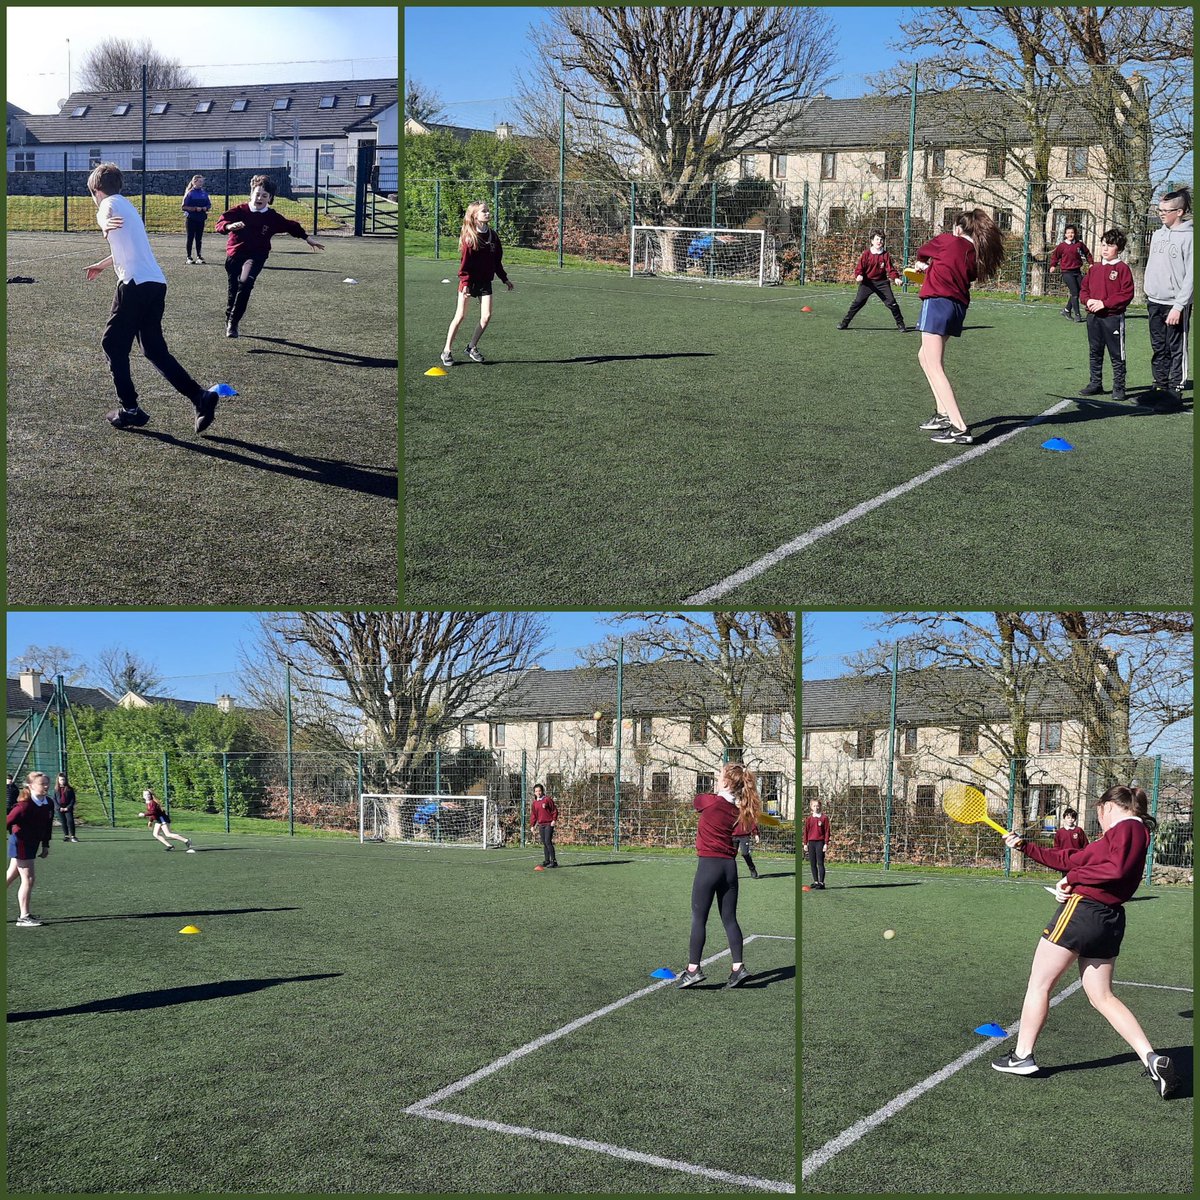 Rounders fun in the sun this morning @kinvarans 🏃‍♀️🏃‍♂️ A great start to our Thursday! @ActiveFlag #movewellmoveoften